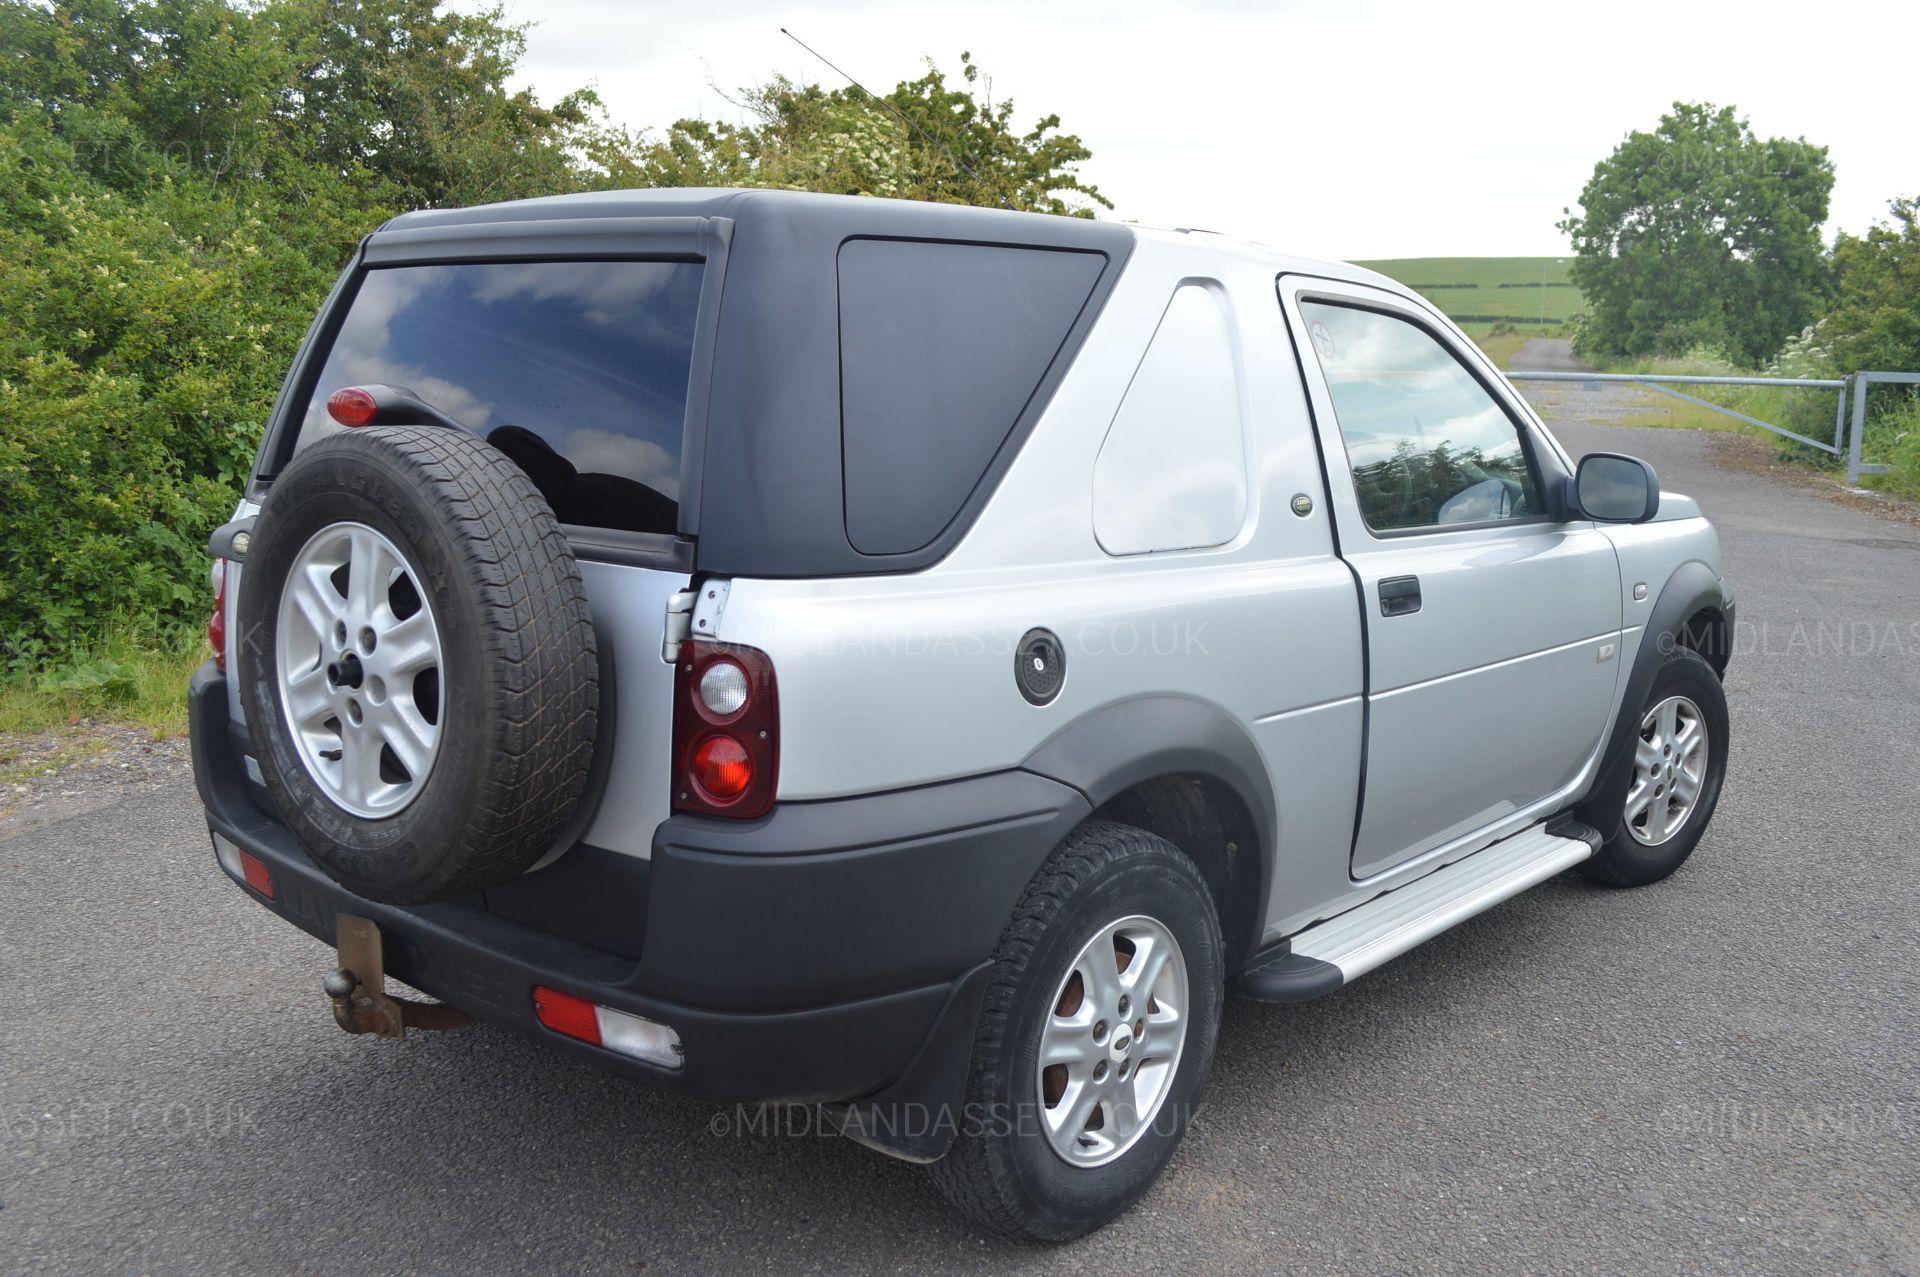 2003/03 REG LAND ROVER FREELANDER 3DR 2.0 TD4 SWB COMMERCIAL 4X4 SPECIAL VEHICLE - AIR CON *NO VAT* - Image 7 of 42